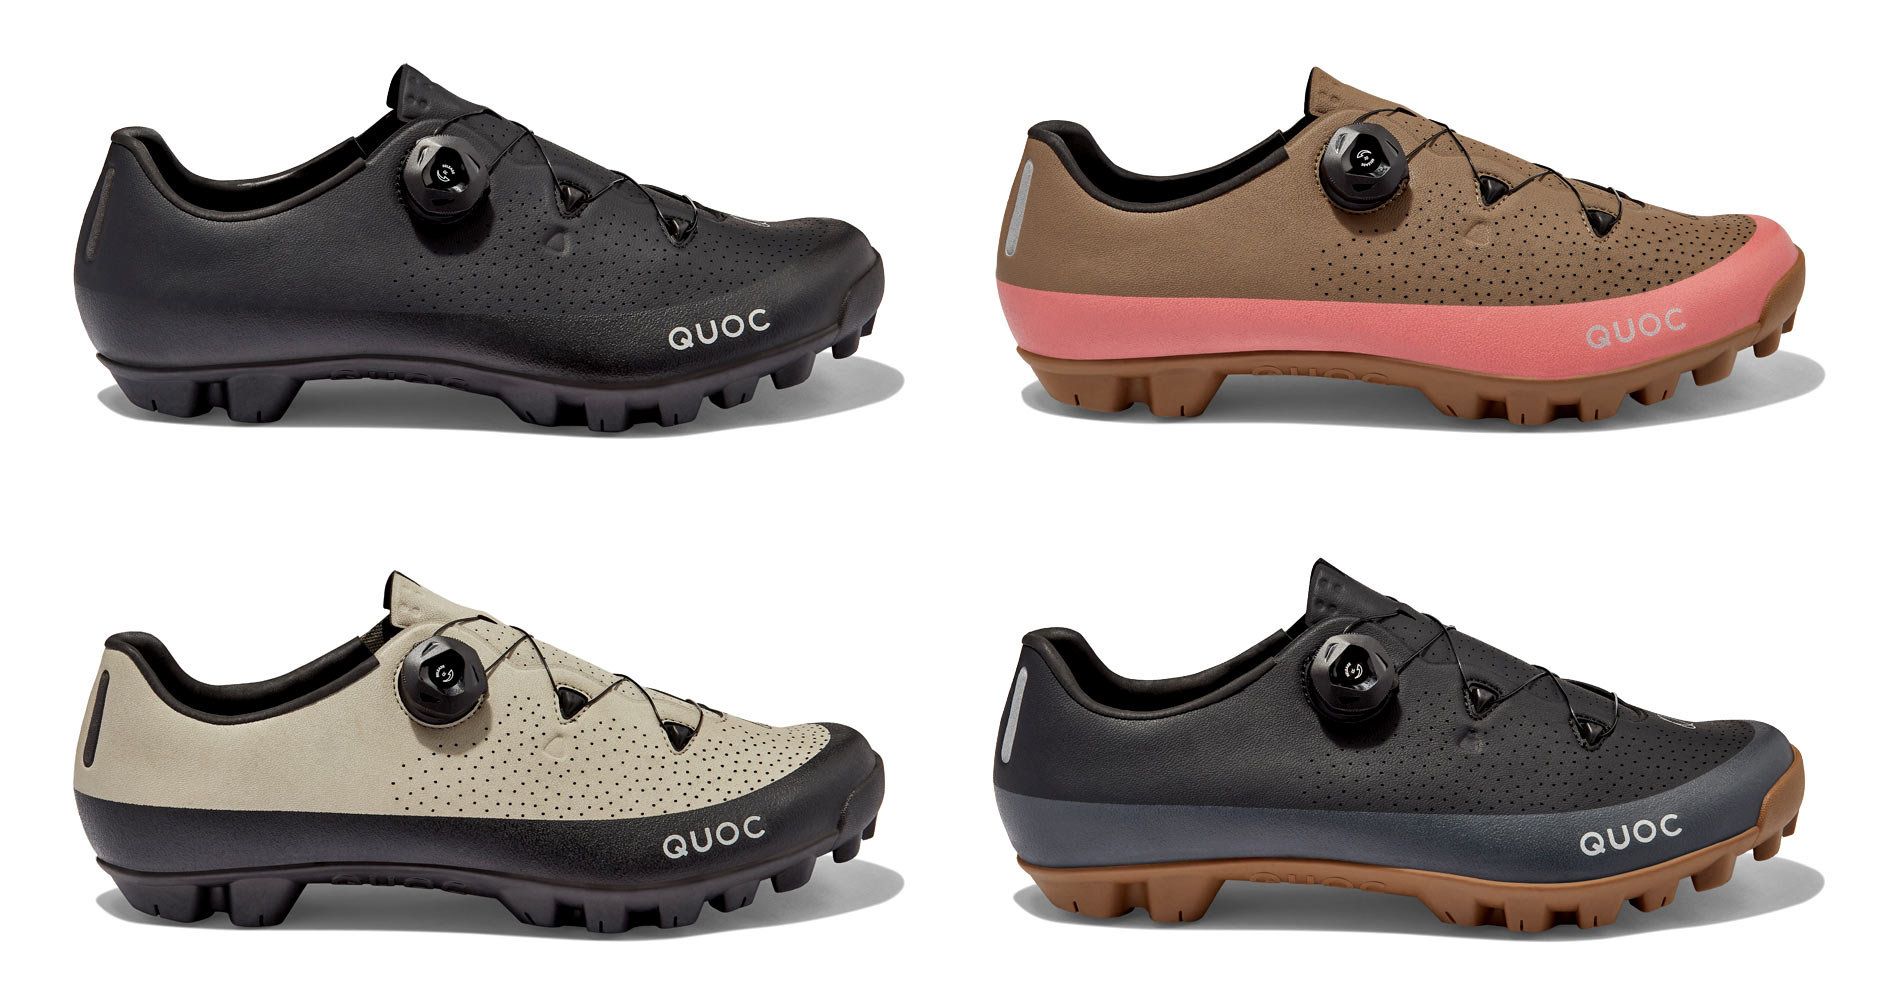 Quoc Gran Tourer II gravel bike shoes updated with dial retention, color options